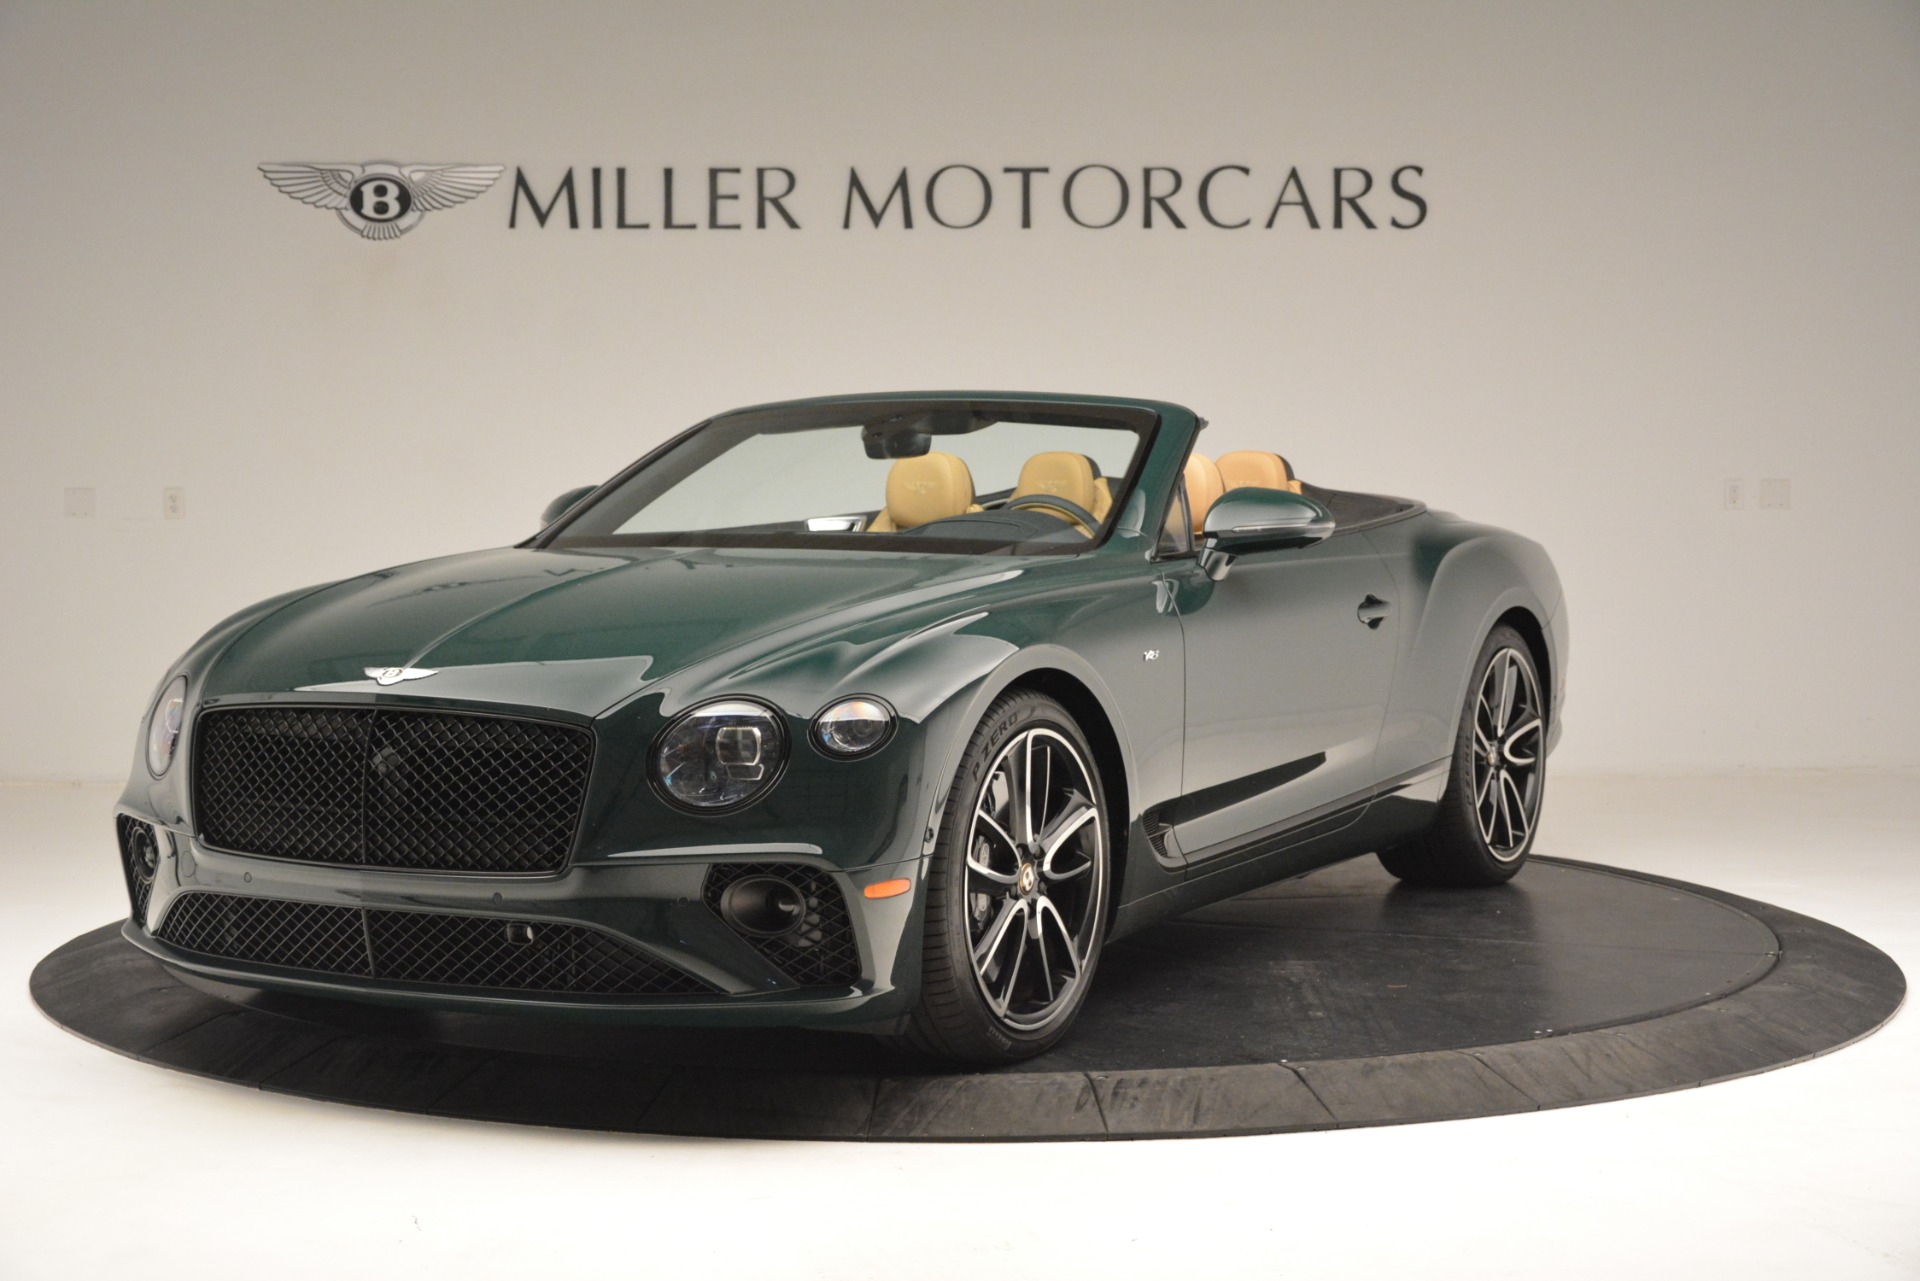 New 2020 Bentley Continental GTC V8 for sale Sold at Bugatti of Greenwich in Greenwich CT 06830 1